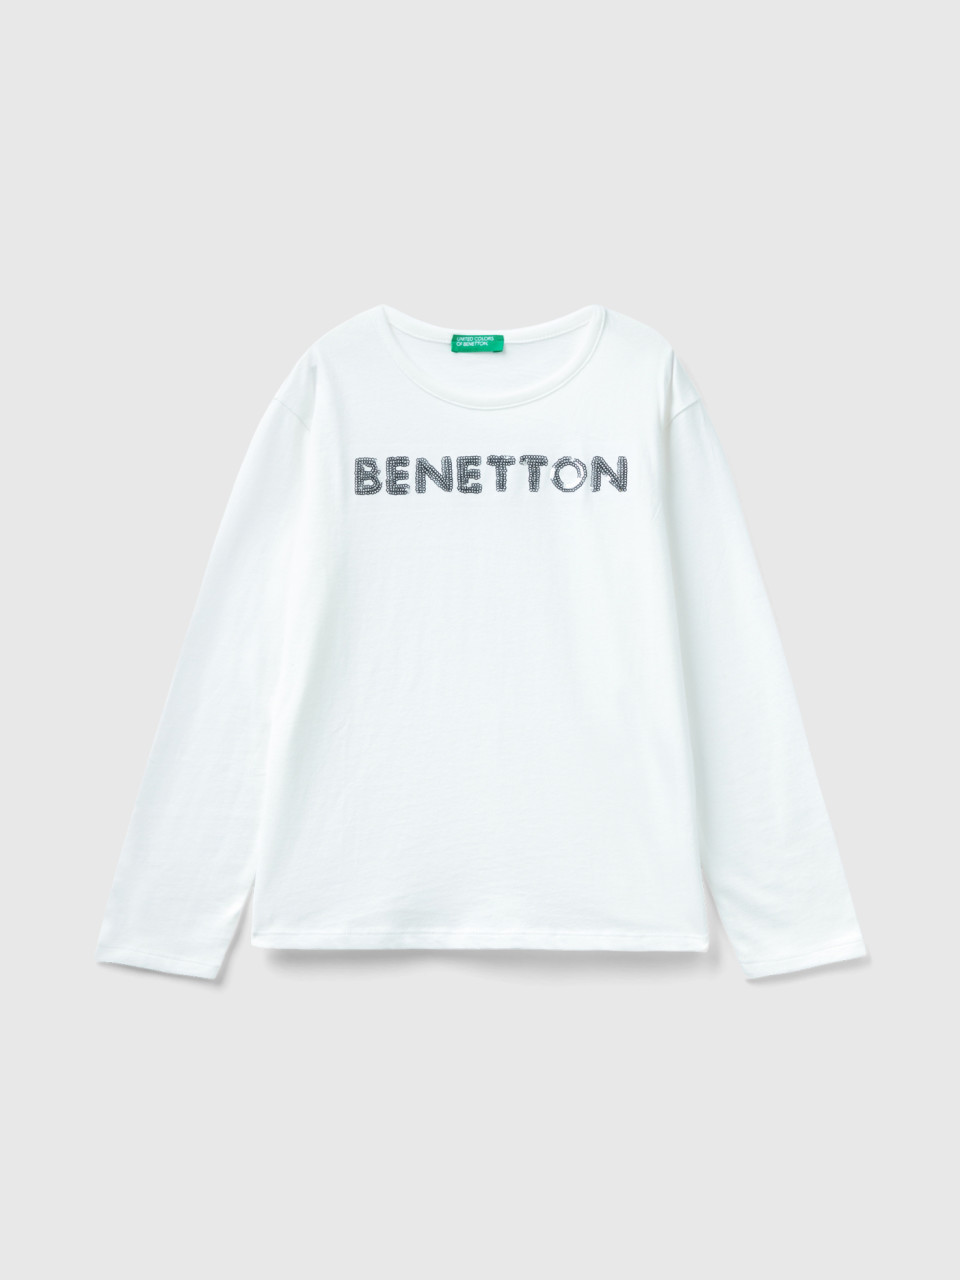 Benetton, T-shirt In Warm Organic Cotton With Sequins, Creamy White, Kids